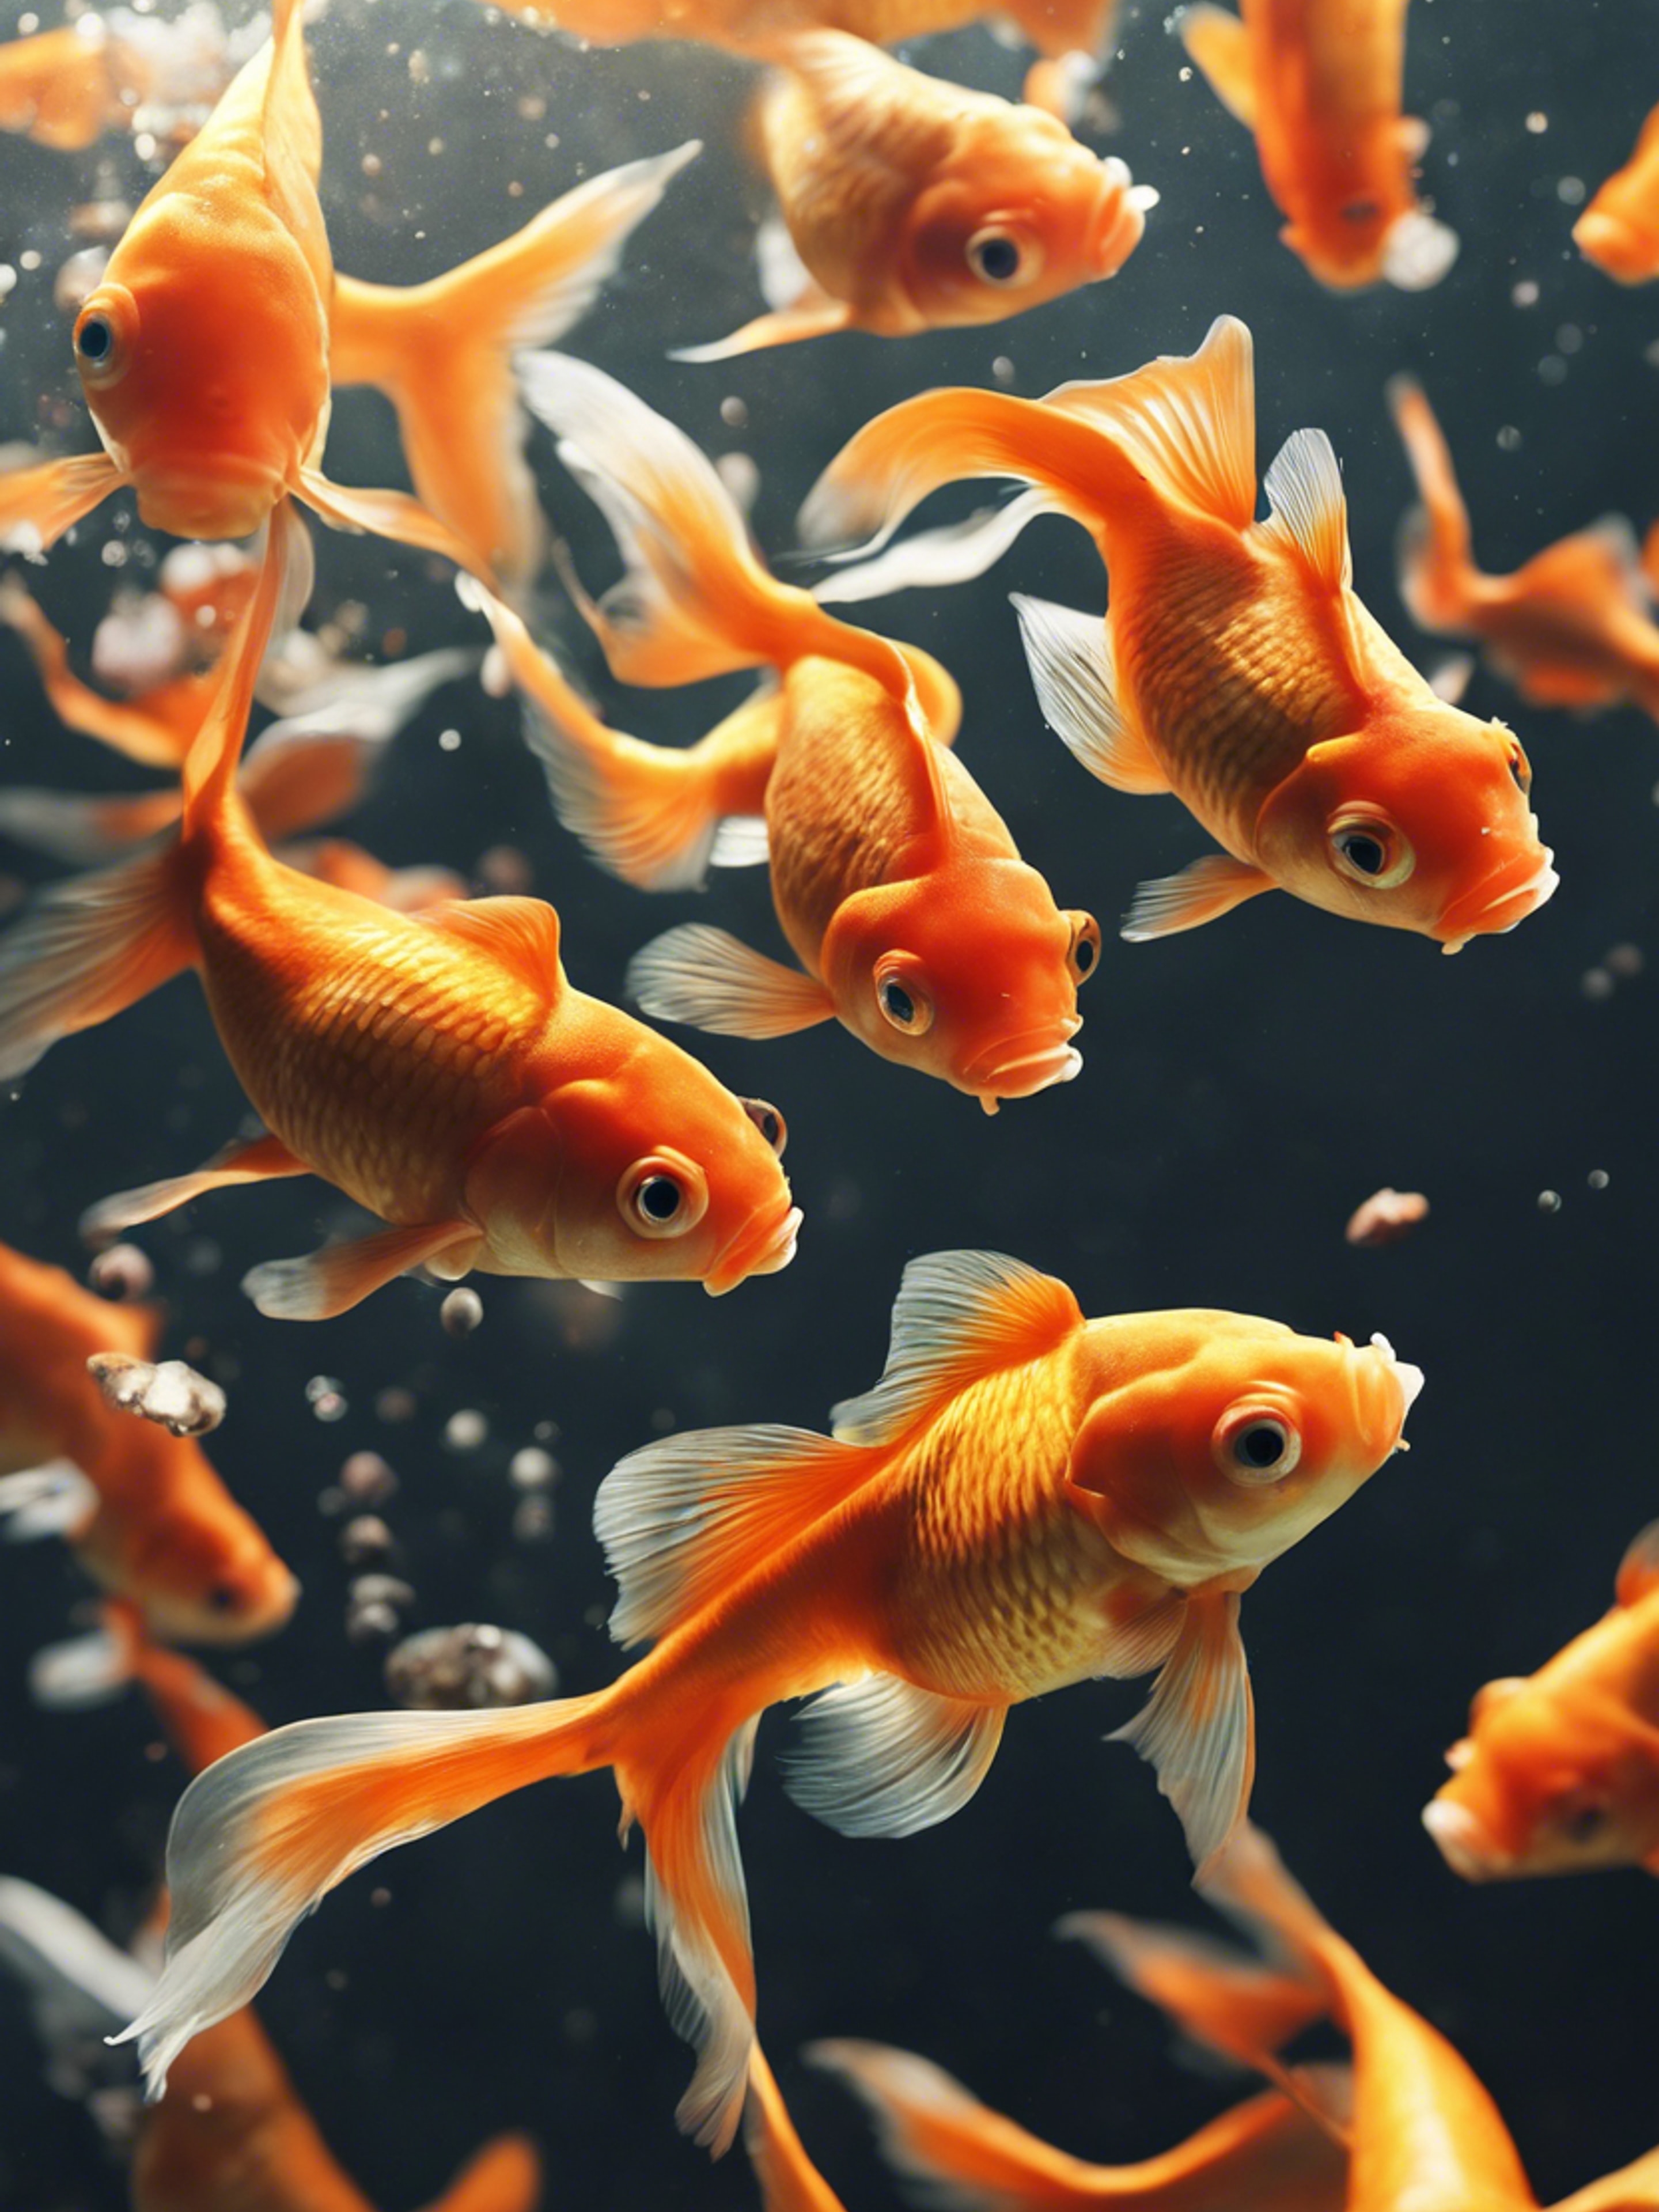 A group of goldfish gathered together feeding on floating fish food in a pond. טפט[884d4a7ab78e48ae91a0]